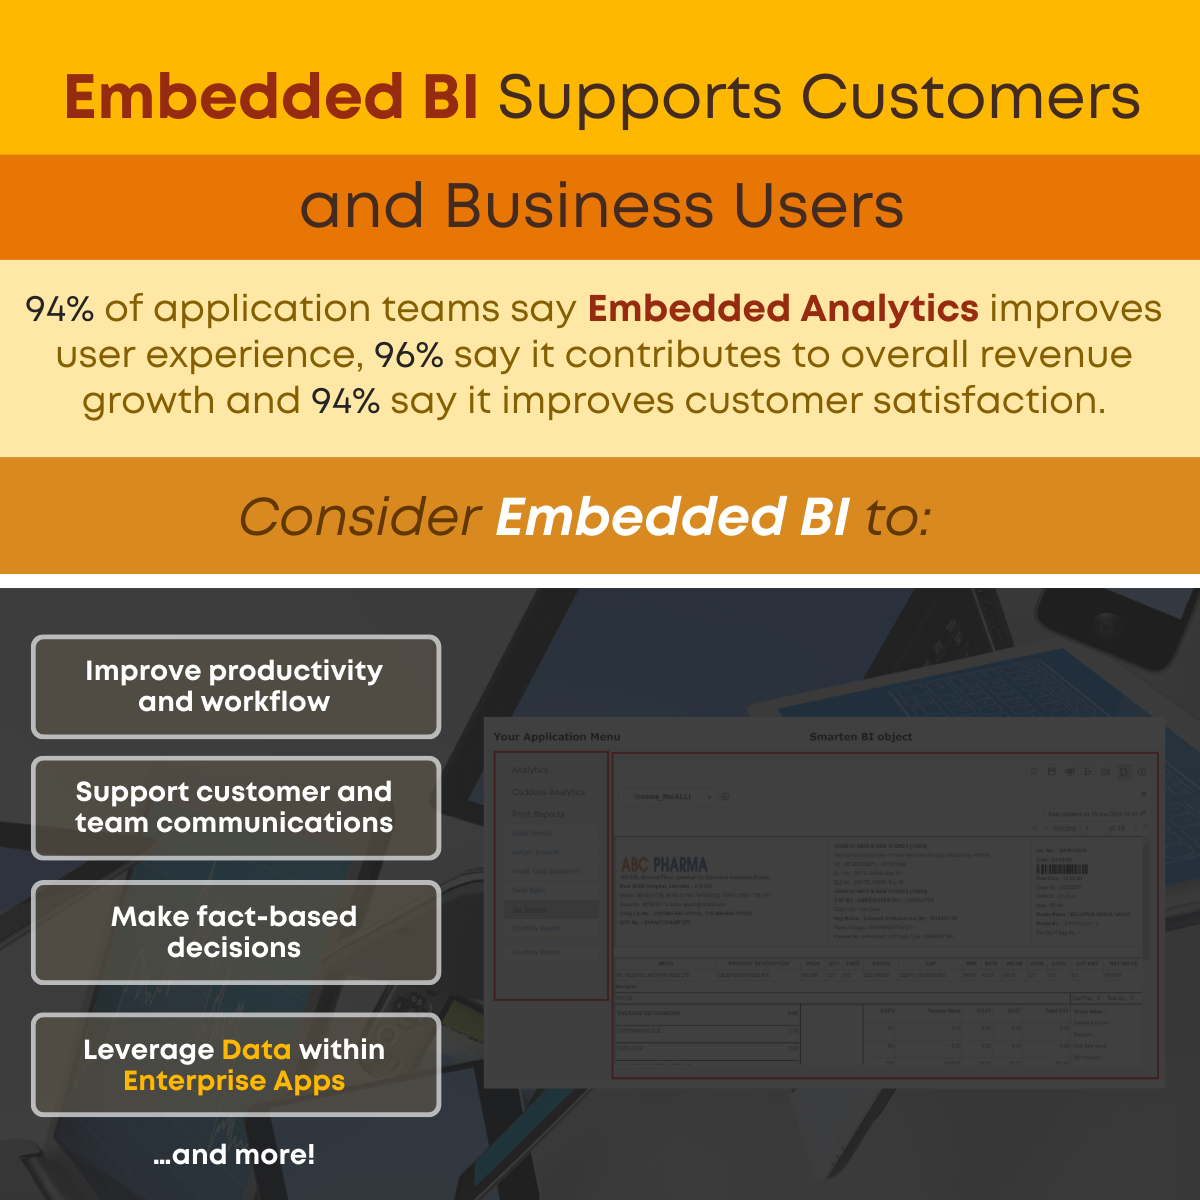 Embedded BI Supports Customers and Business Users